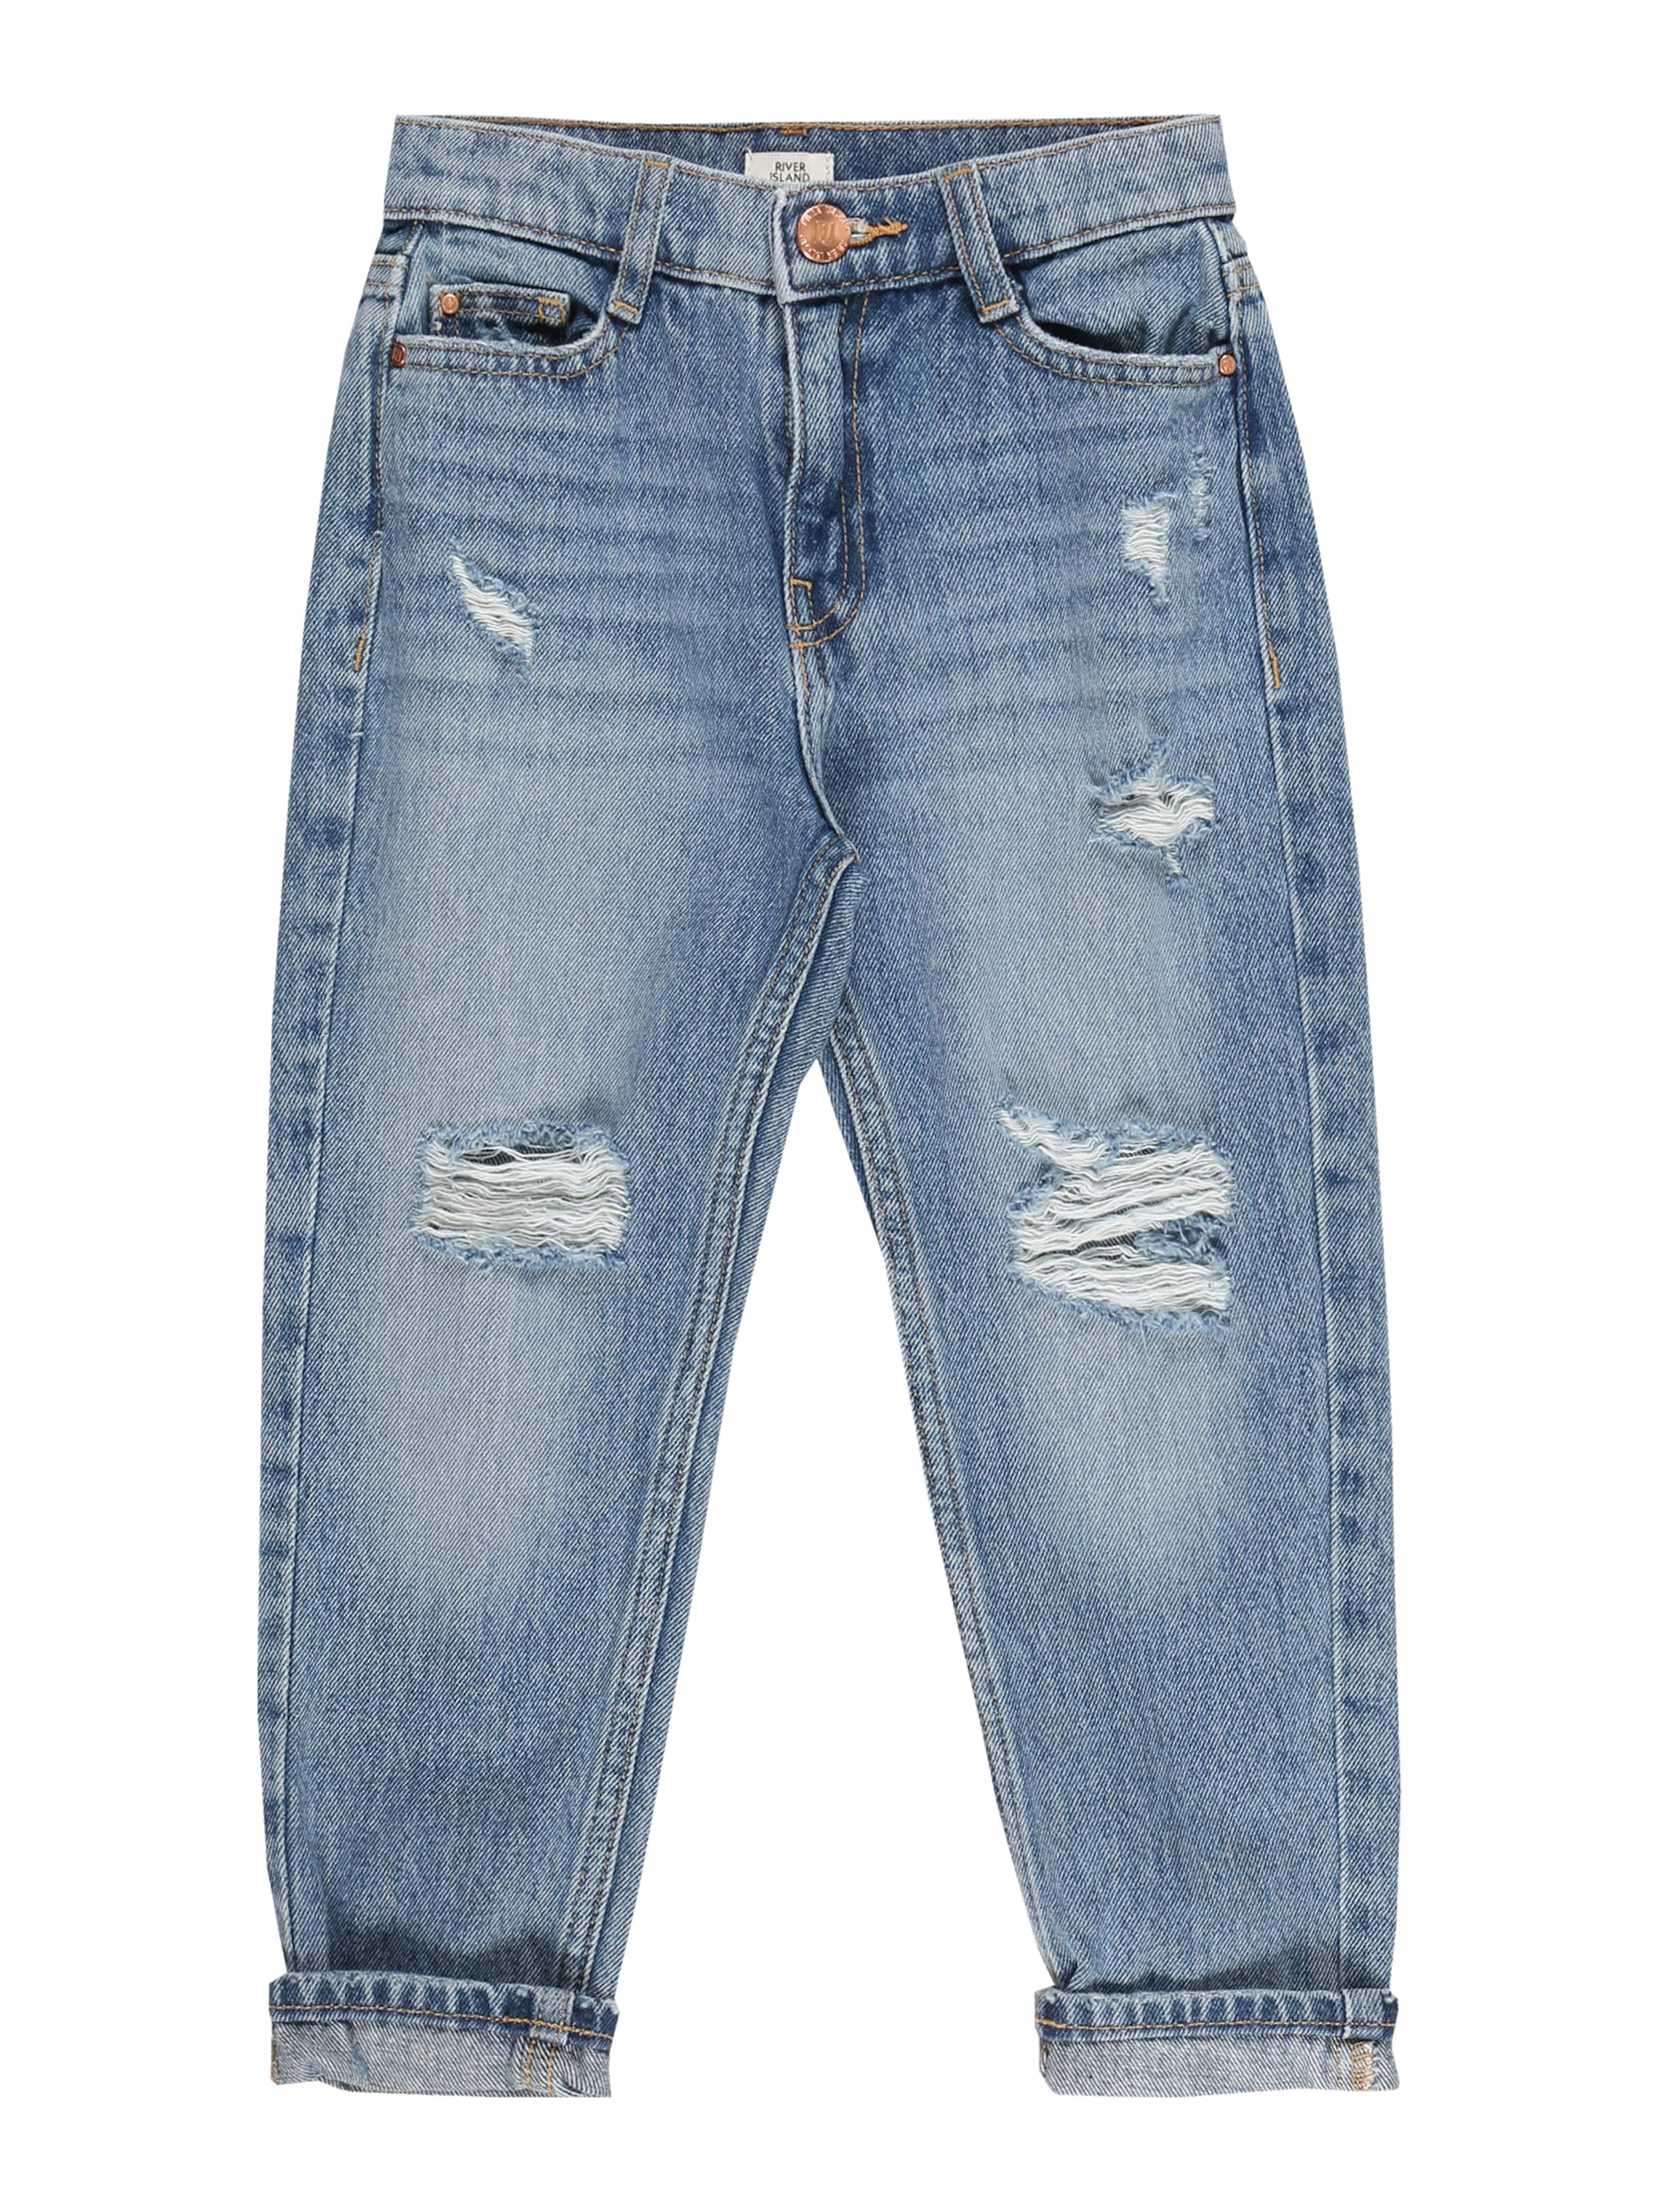 Kinder Teens (Gr. 140-176) River Island Jeans 'AUTHENTIC' in Blau - DW43799